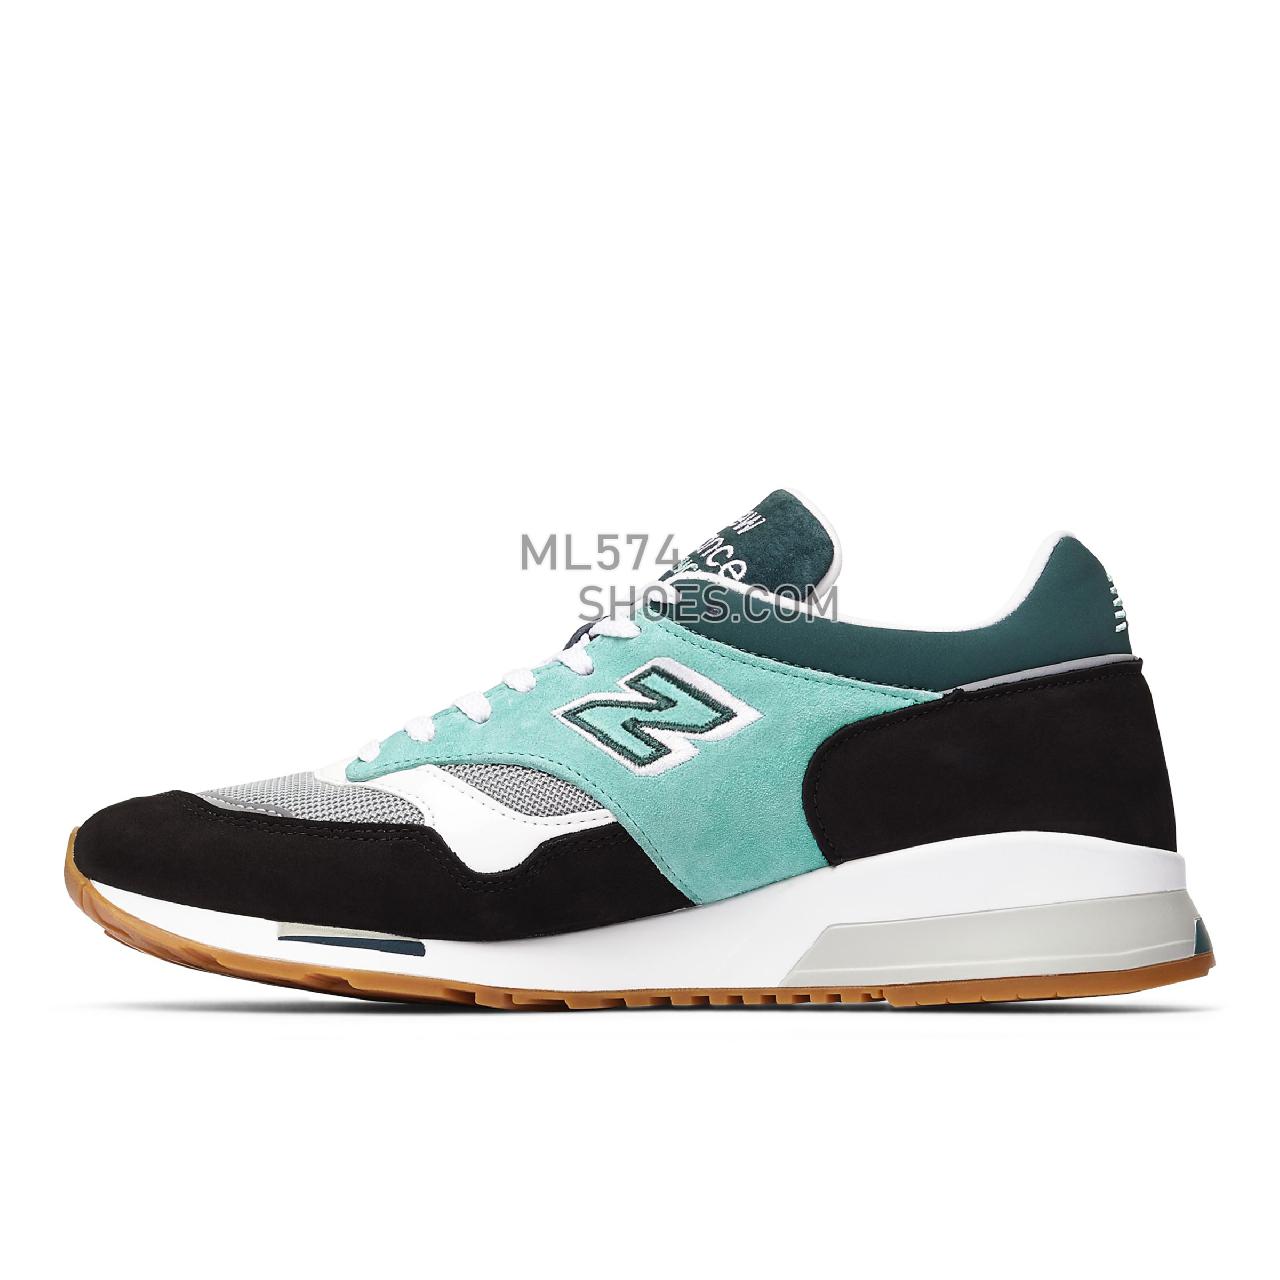 New Balance Made in UK 1500 - Men's Made in USA And UK Sneakers - Black with Grey and Mint - M1500LIB